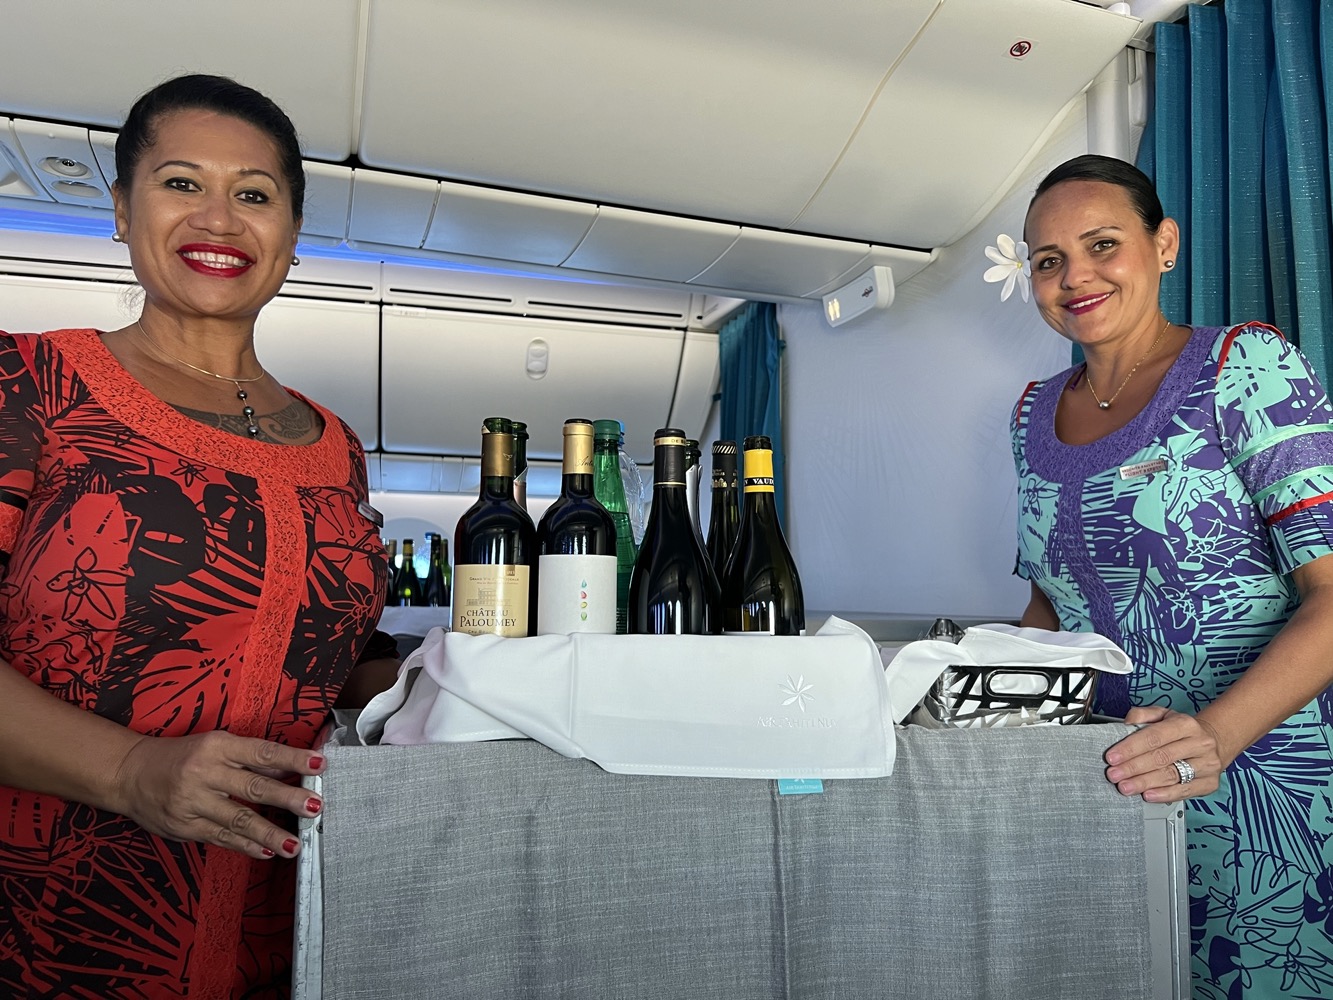 two women standing next to a cart of wine bottles